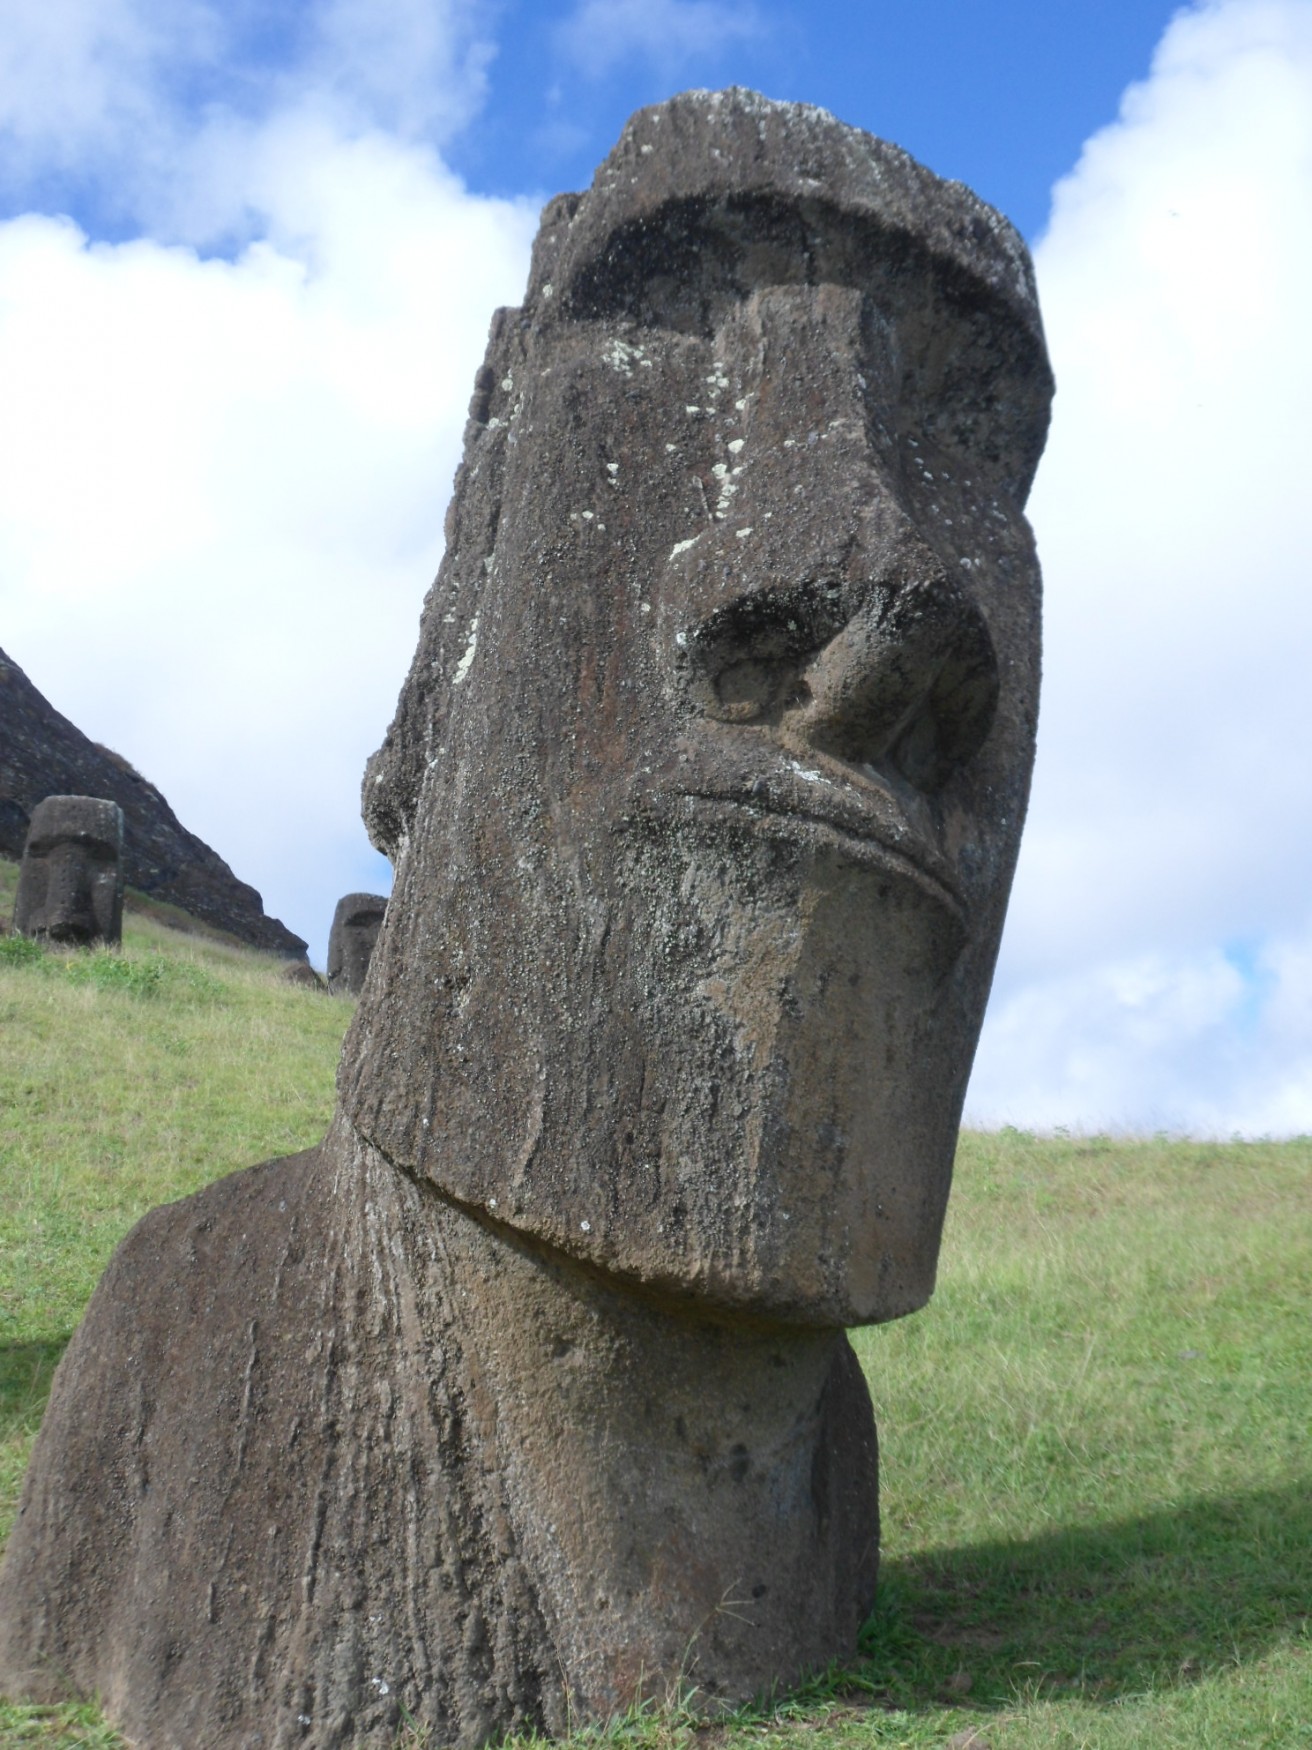 Gratuitous Easter Island Statue Pictures Post